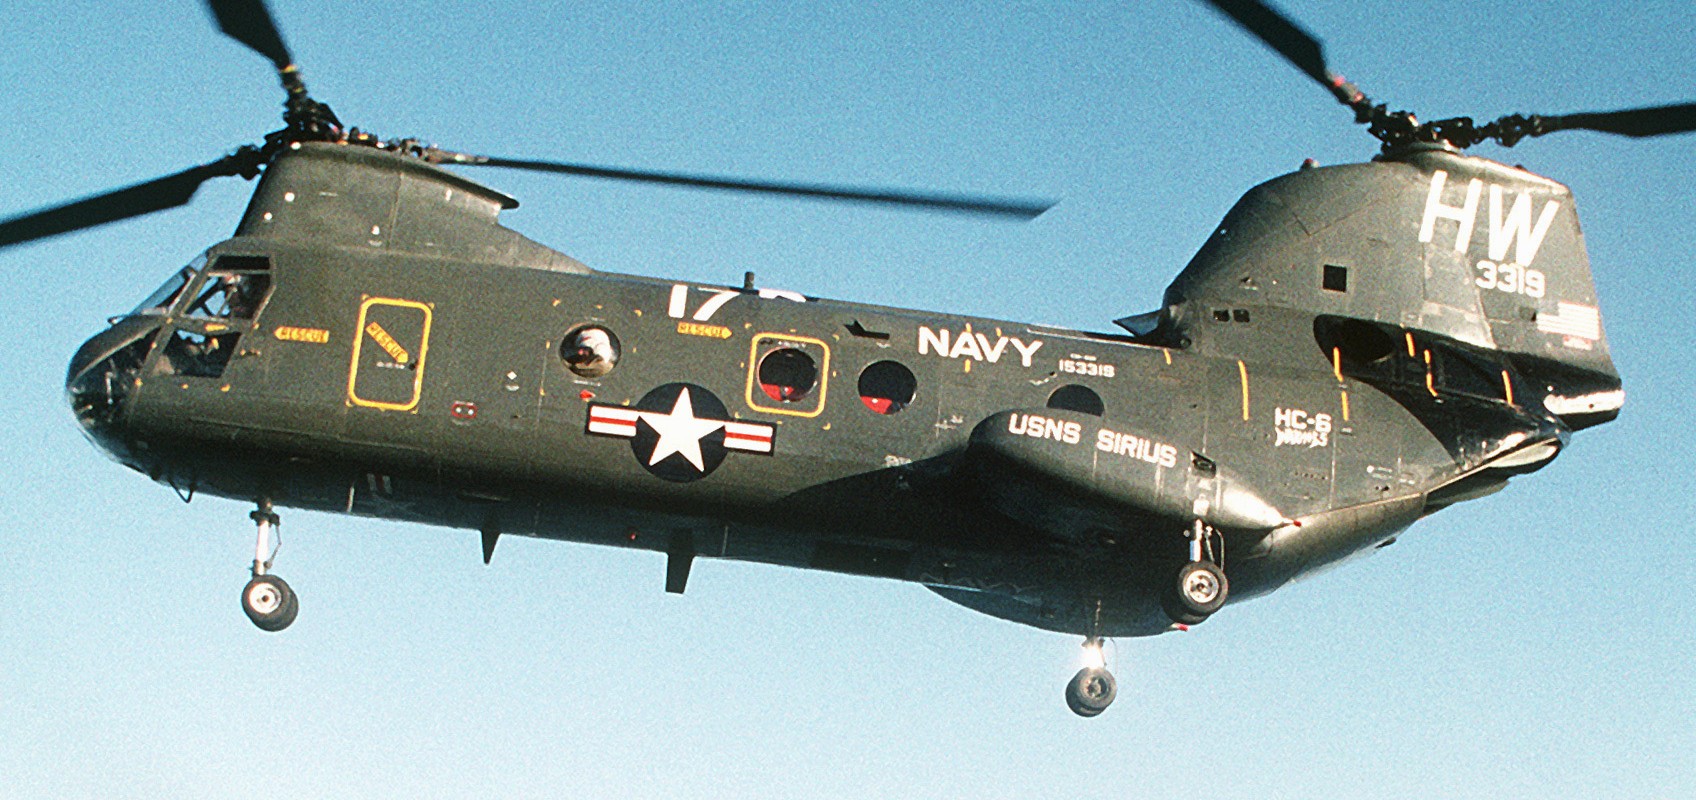 hc-6 chargers helicopter combat support squadron navy ch-46 sea knight 65